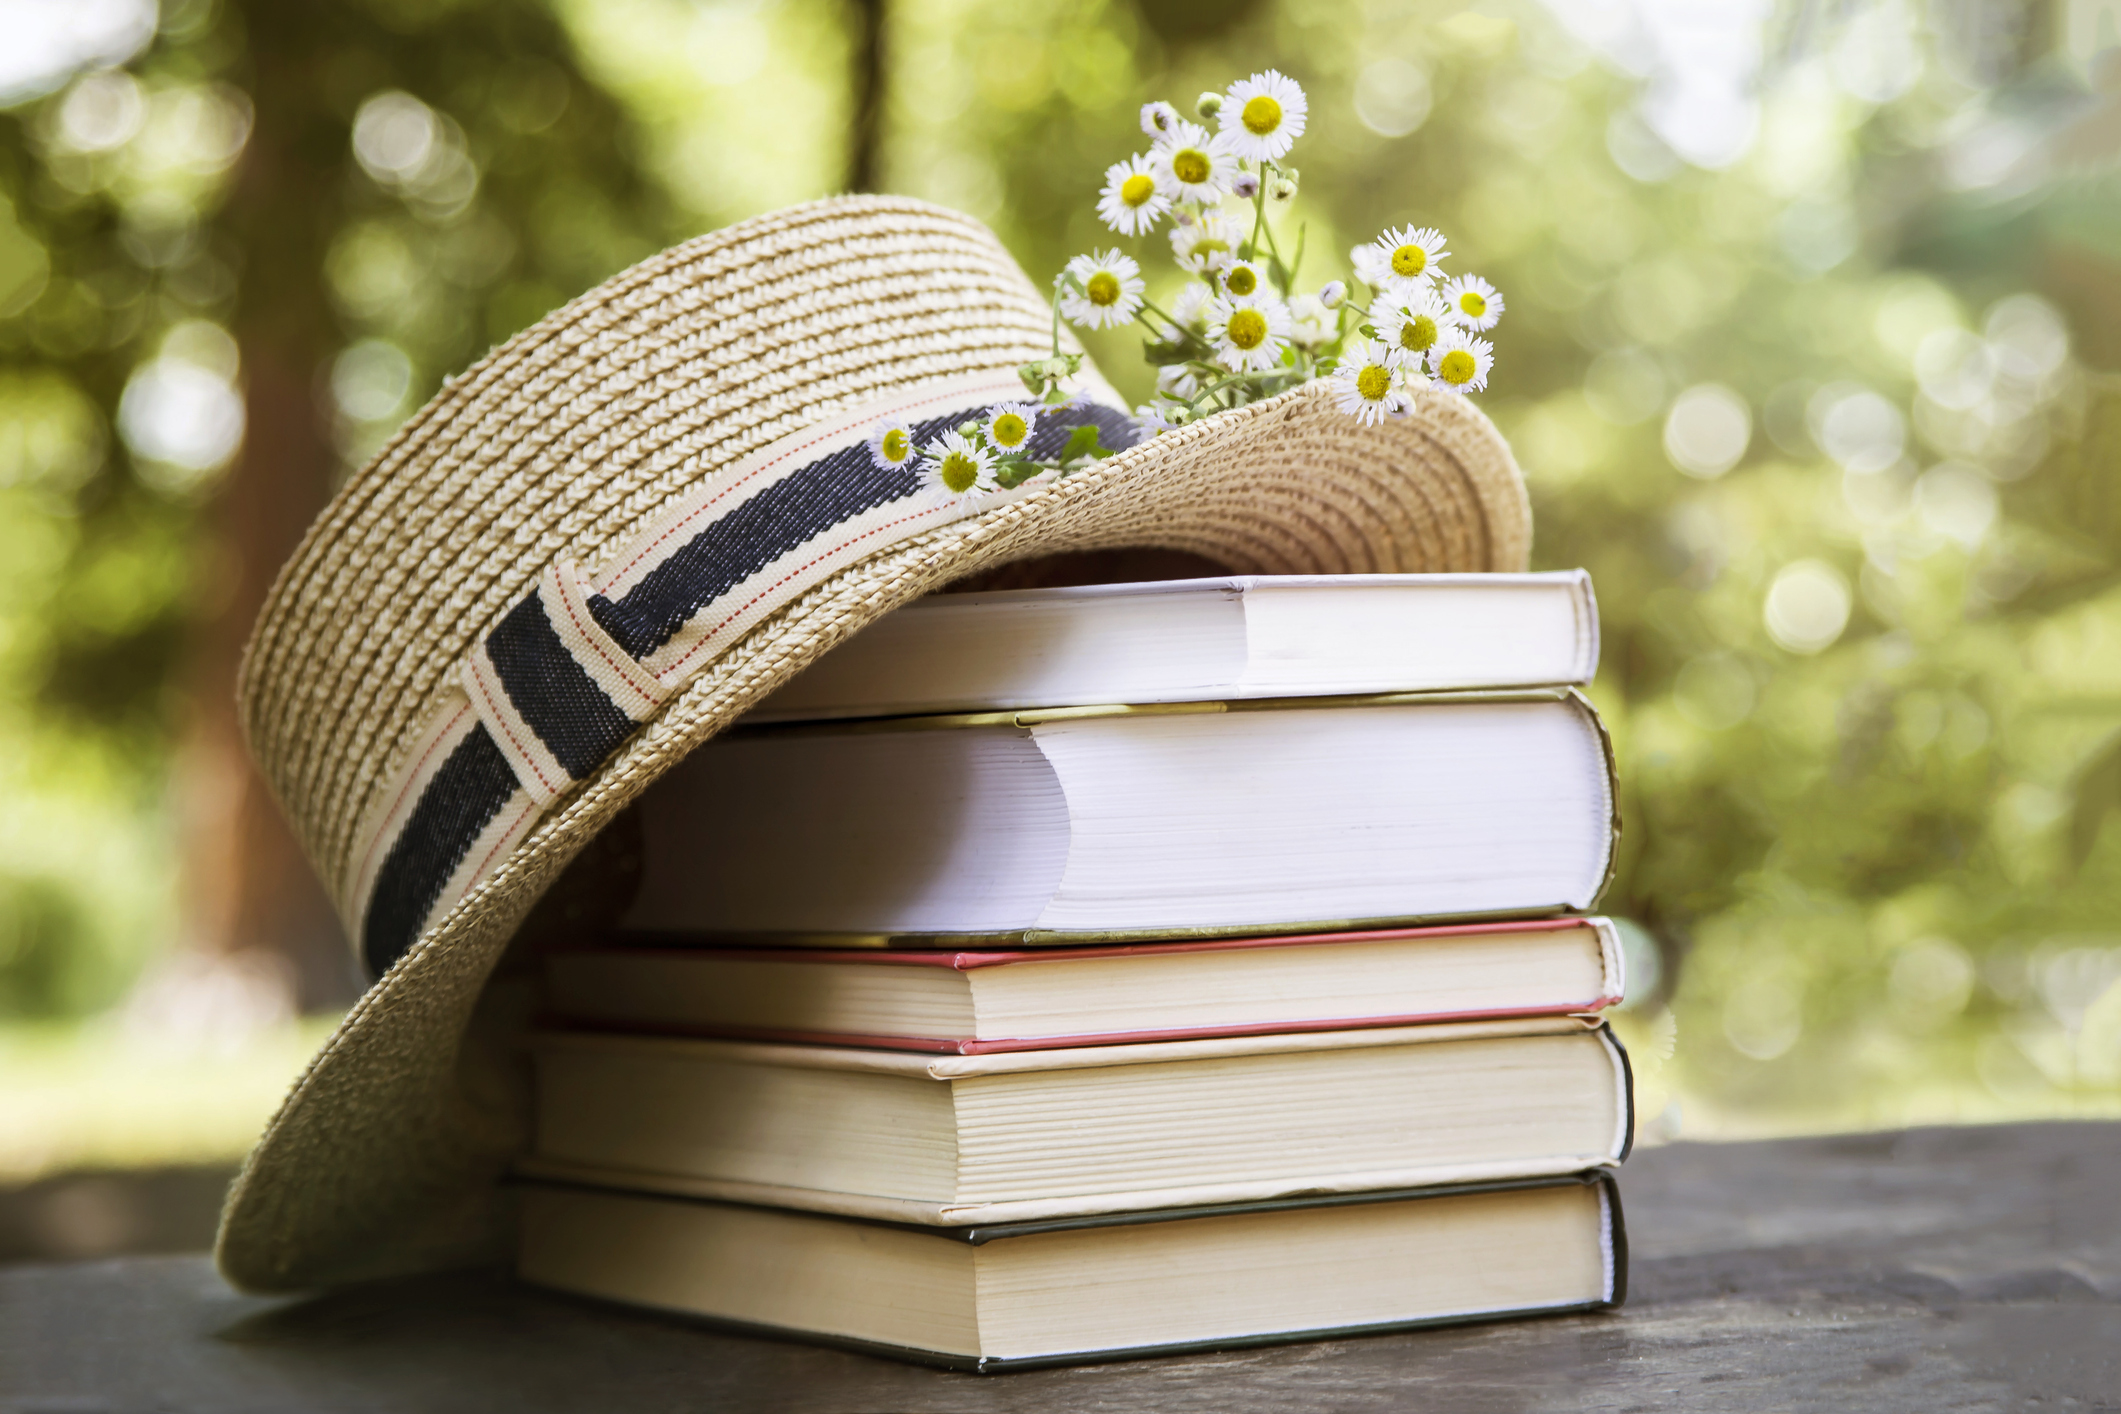 Stack of books outdoors with a hat and flowers on top of them